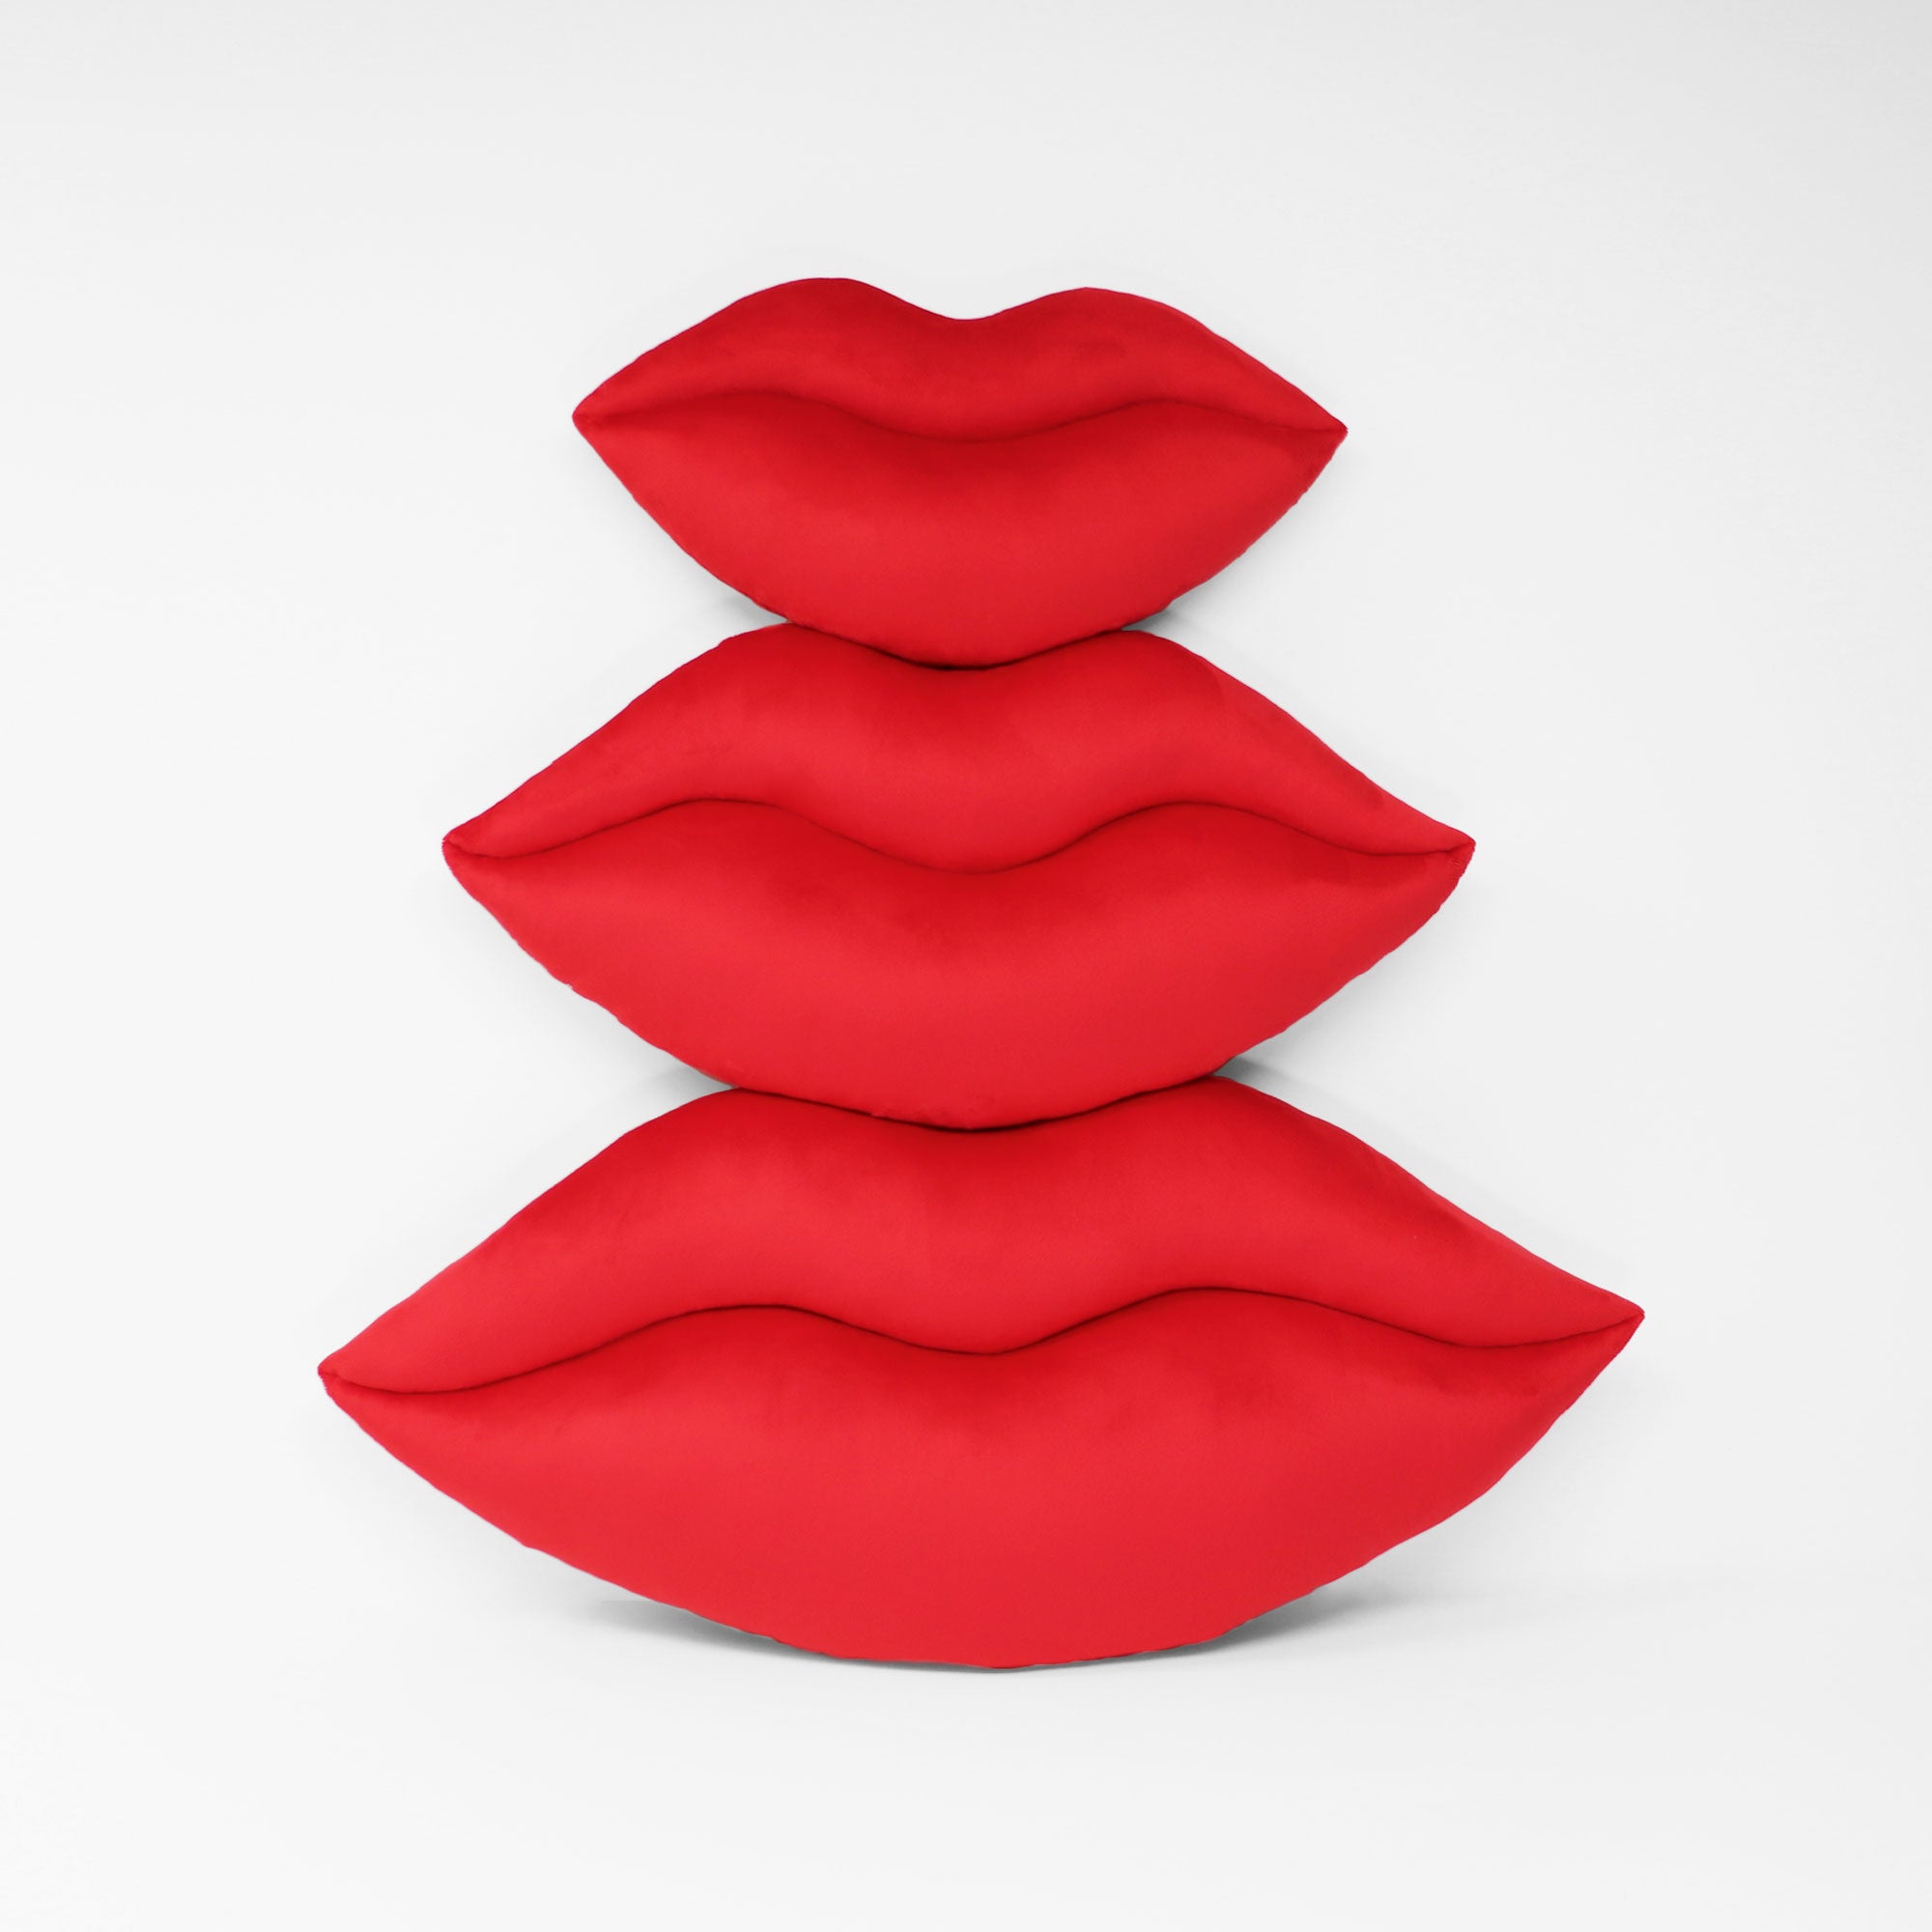 Scarlet Red lips shaped decorative pillows shown in three sizes.